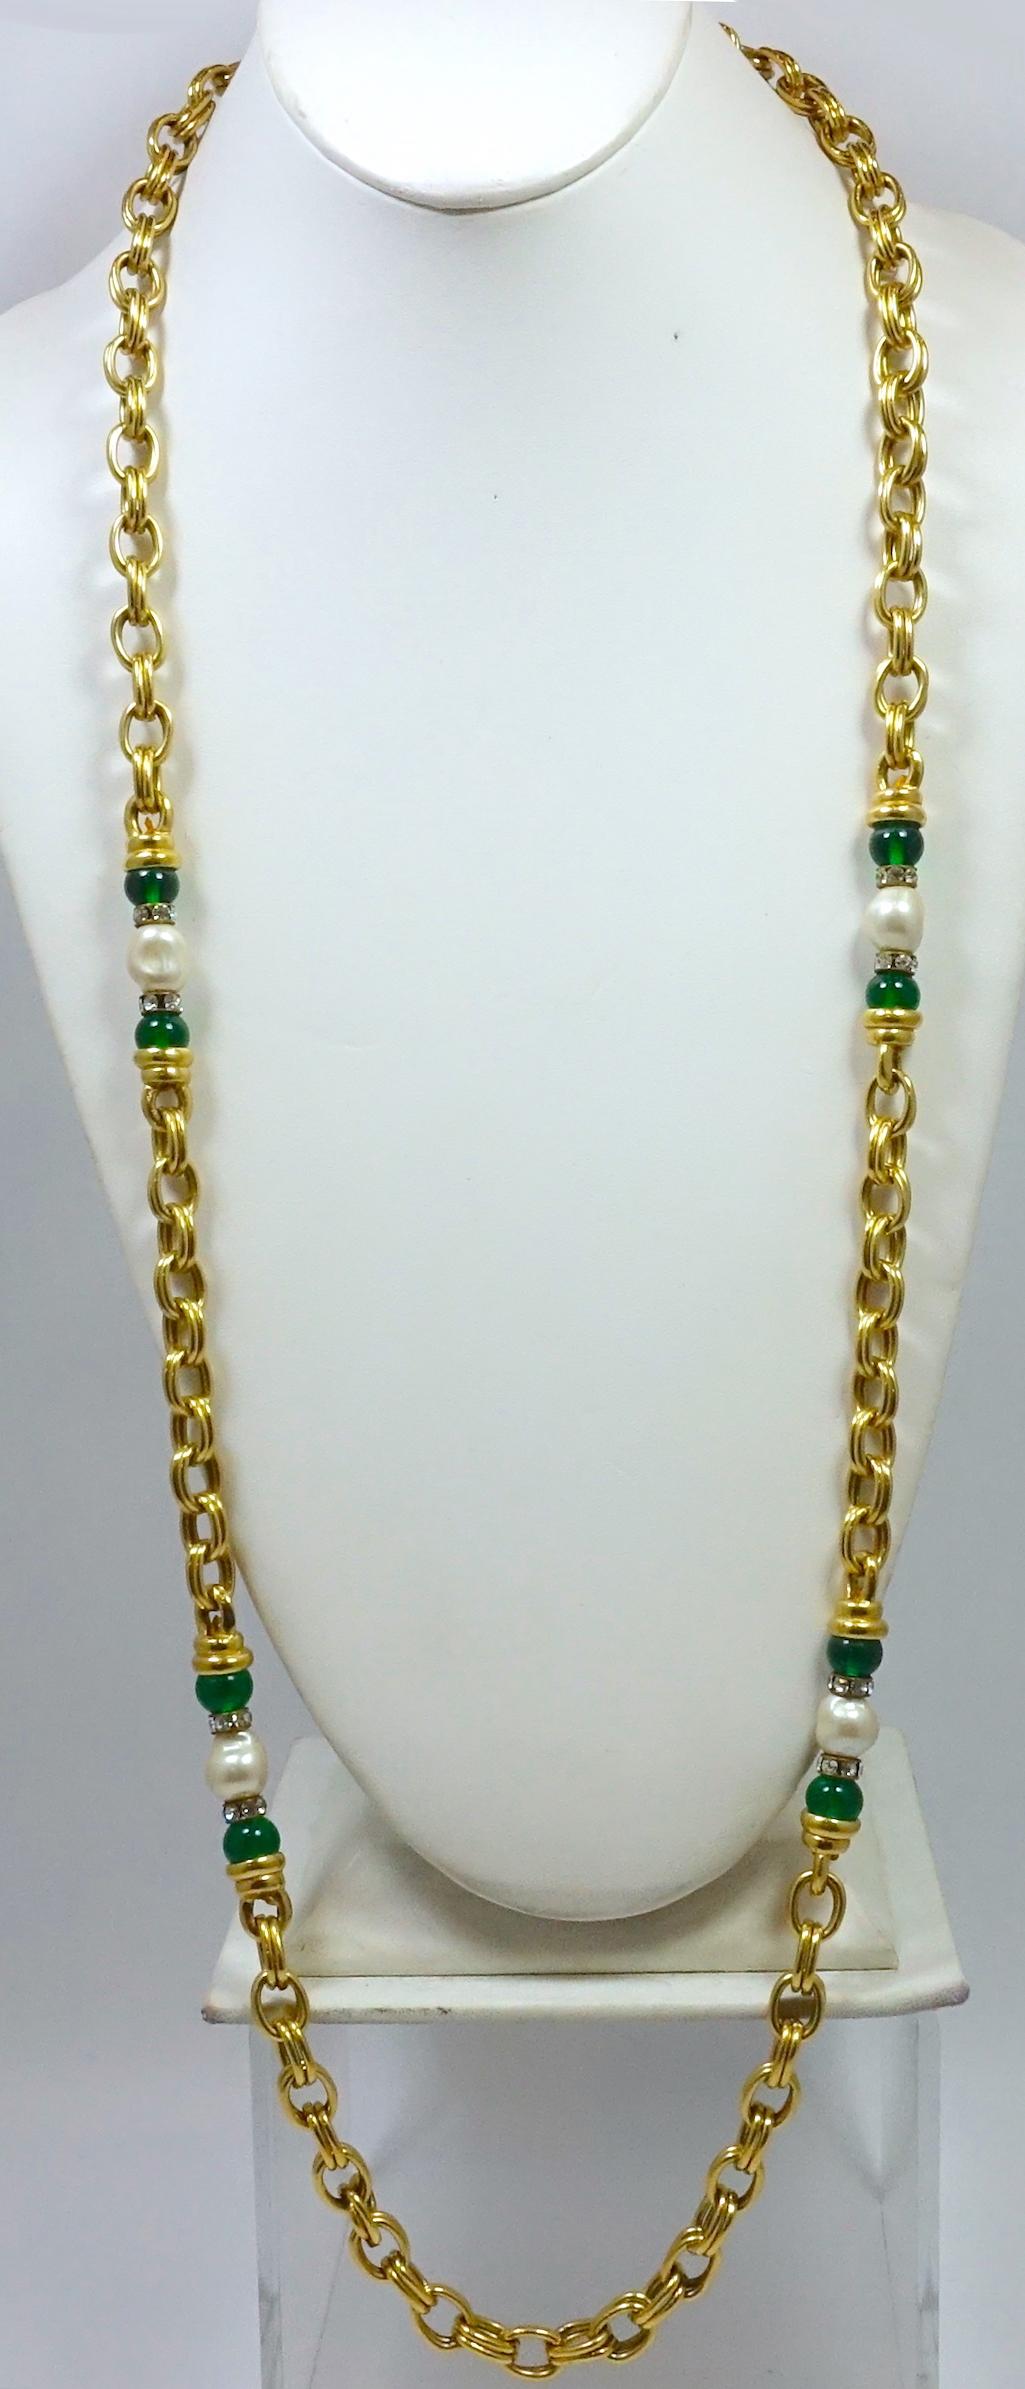 This vintage sautoir necklace has the look of Chanel. It is designed with a heavy link chain with faux pearls and green beads with clear crystal accents.  It is set in a gold tone metal and measure 38” x 3/8”. This sautoir necklace is in excellent